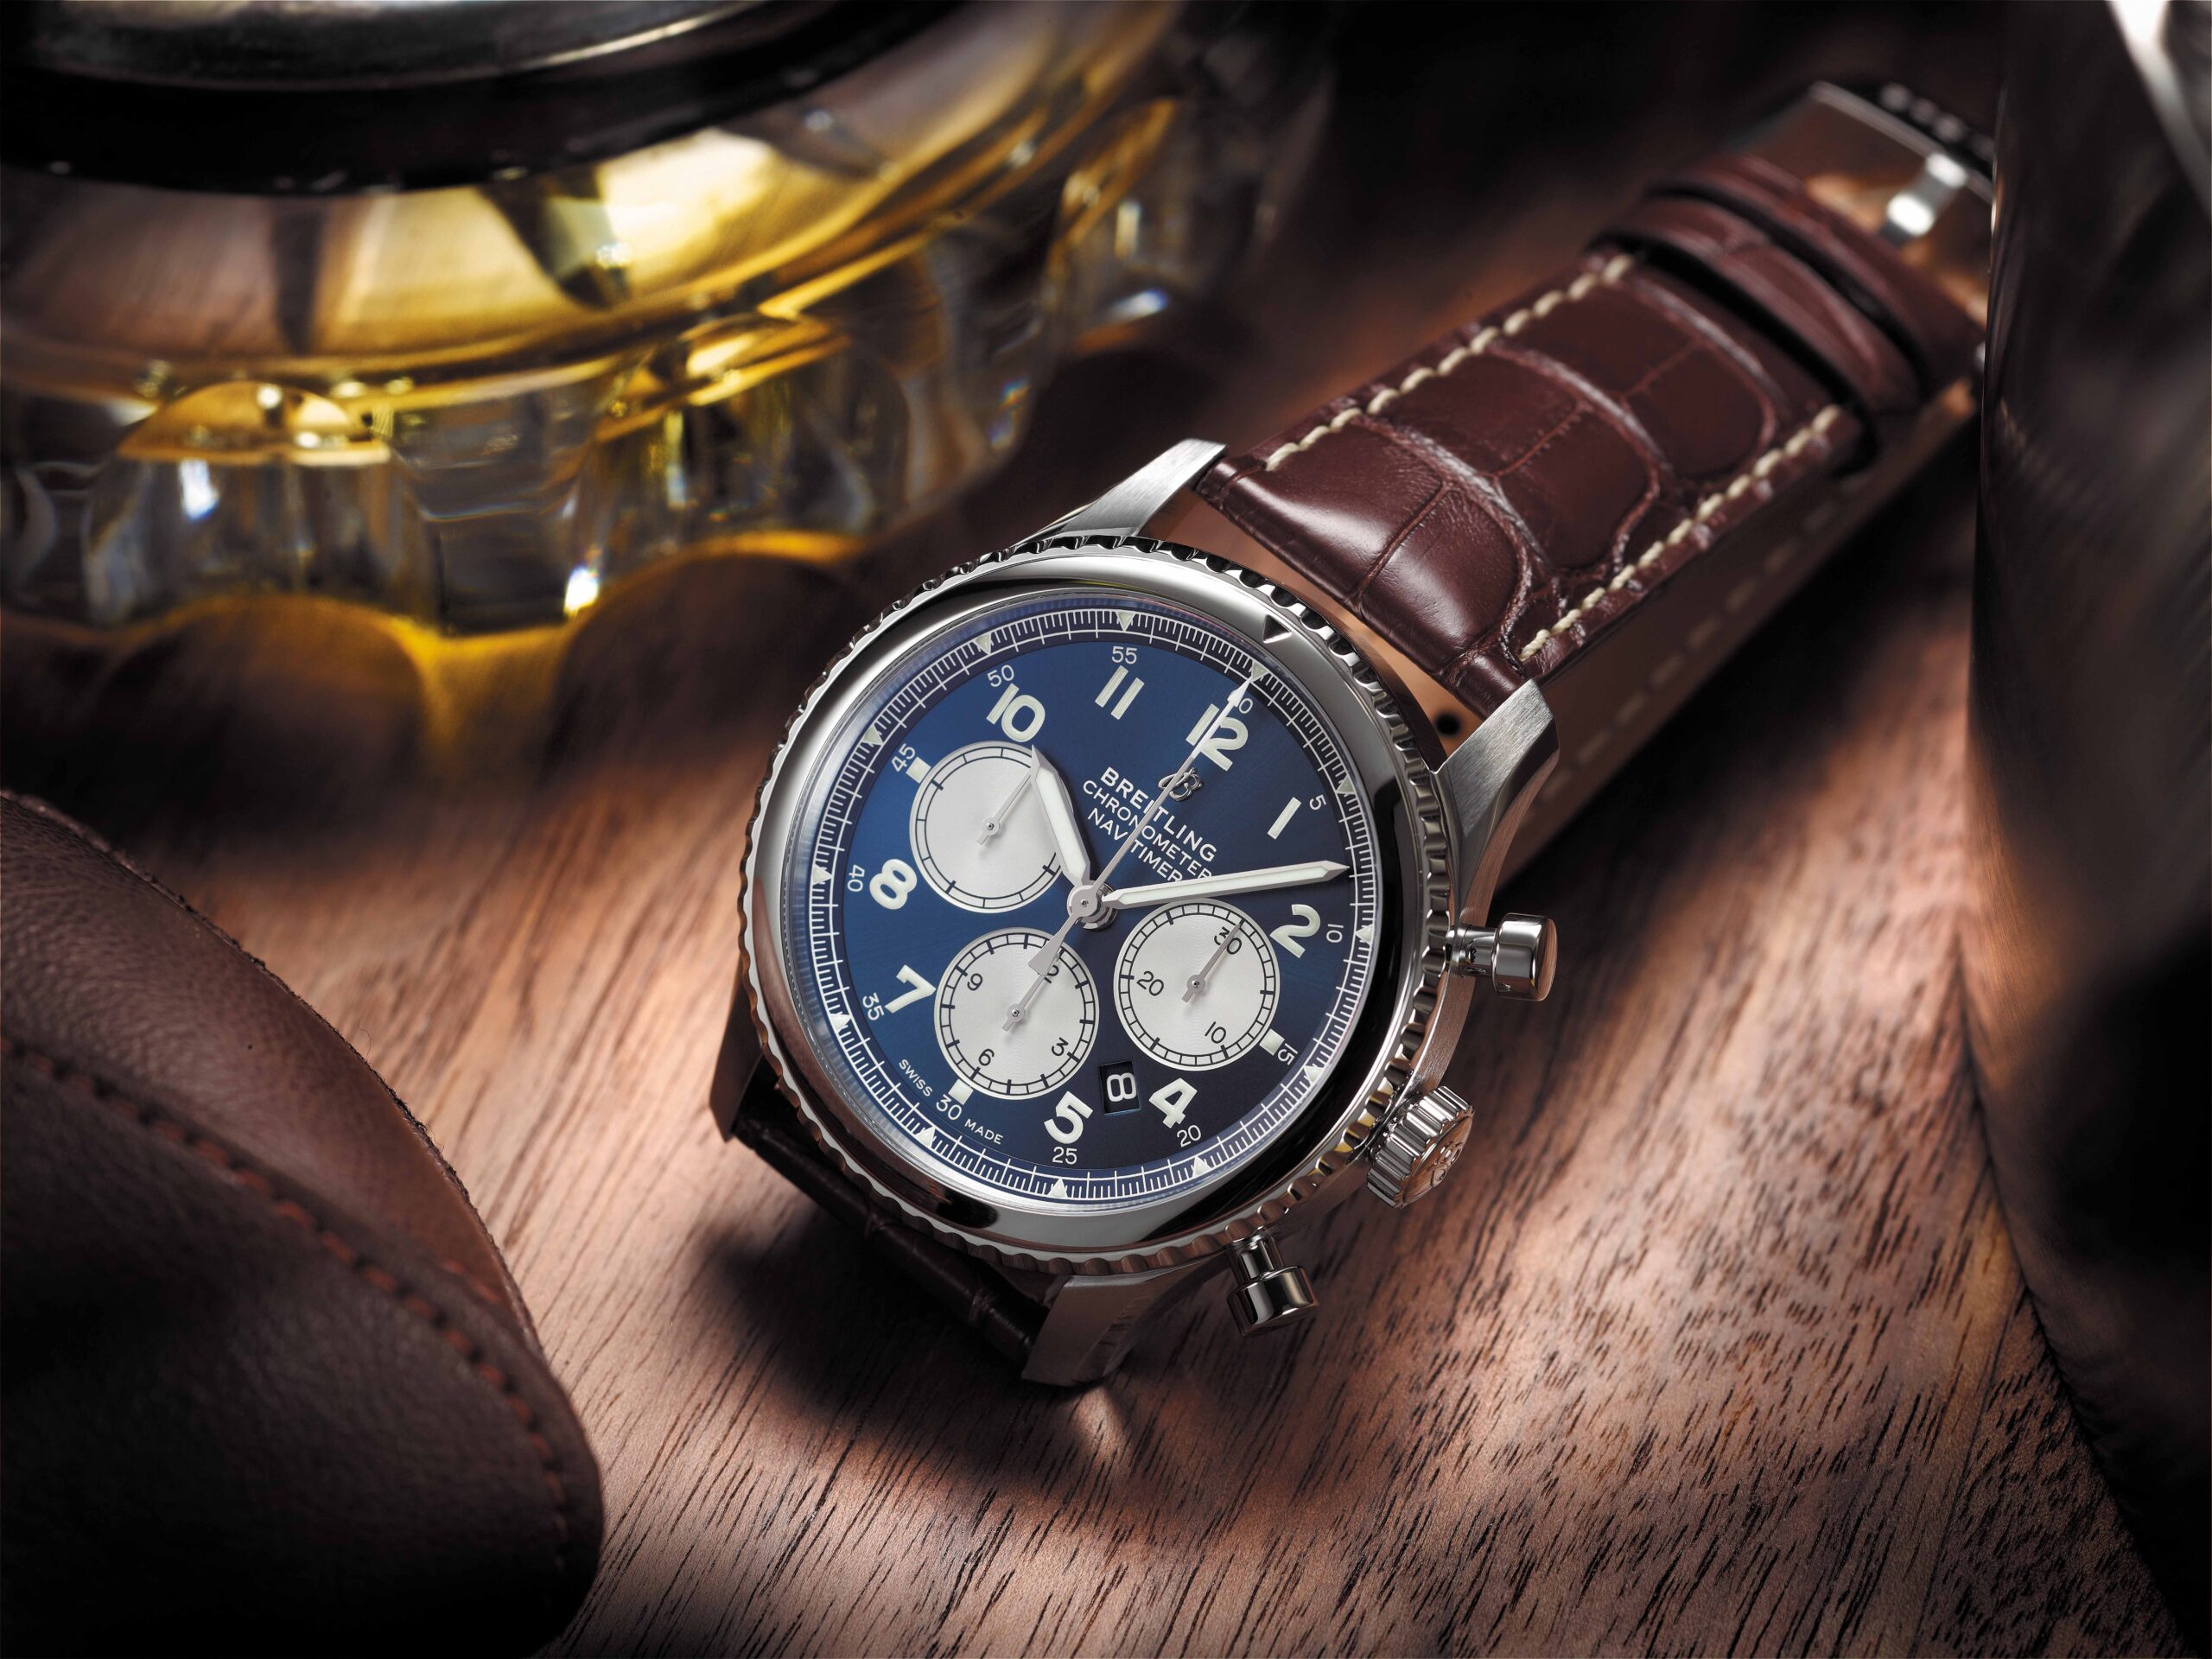 The new BREITLING Navitimer 8 Collection